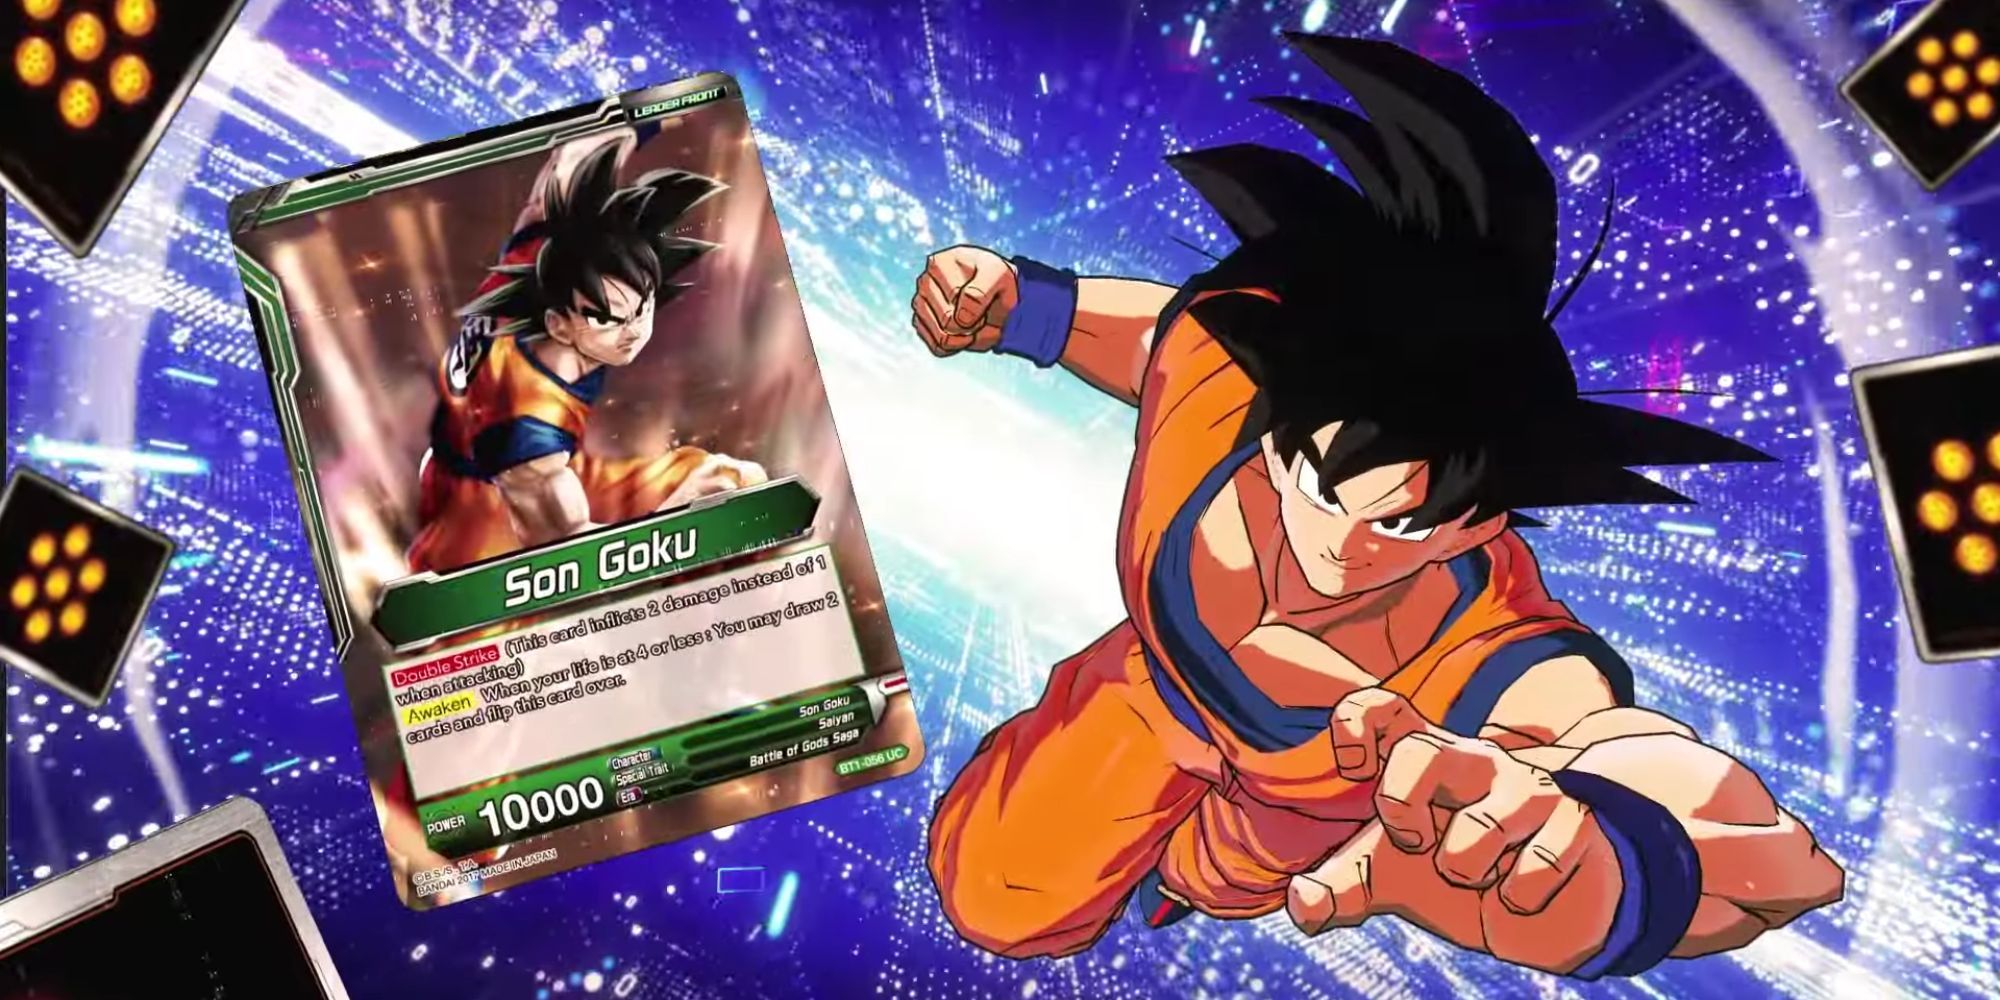 Dragon Ball has revealed which version of Goku is more powerful